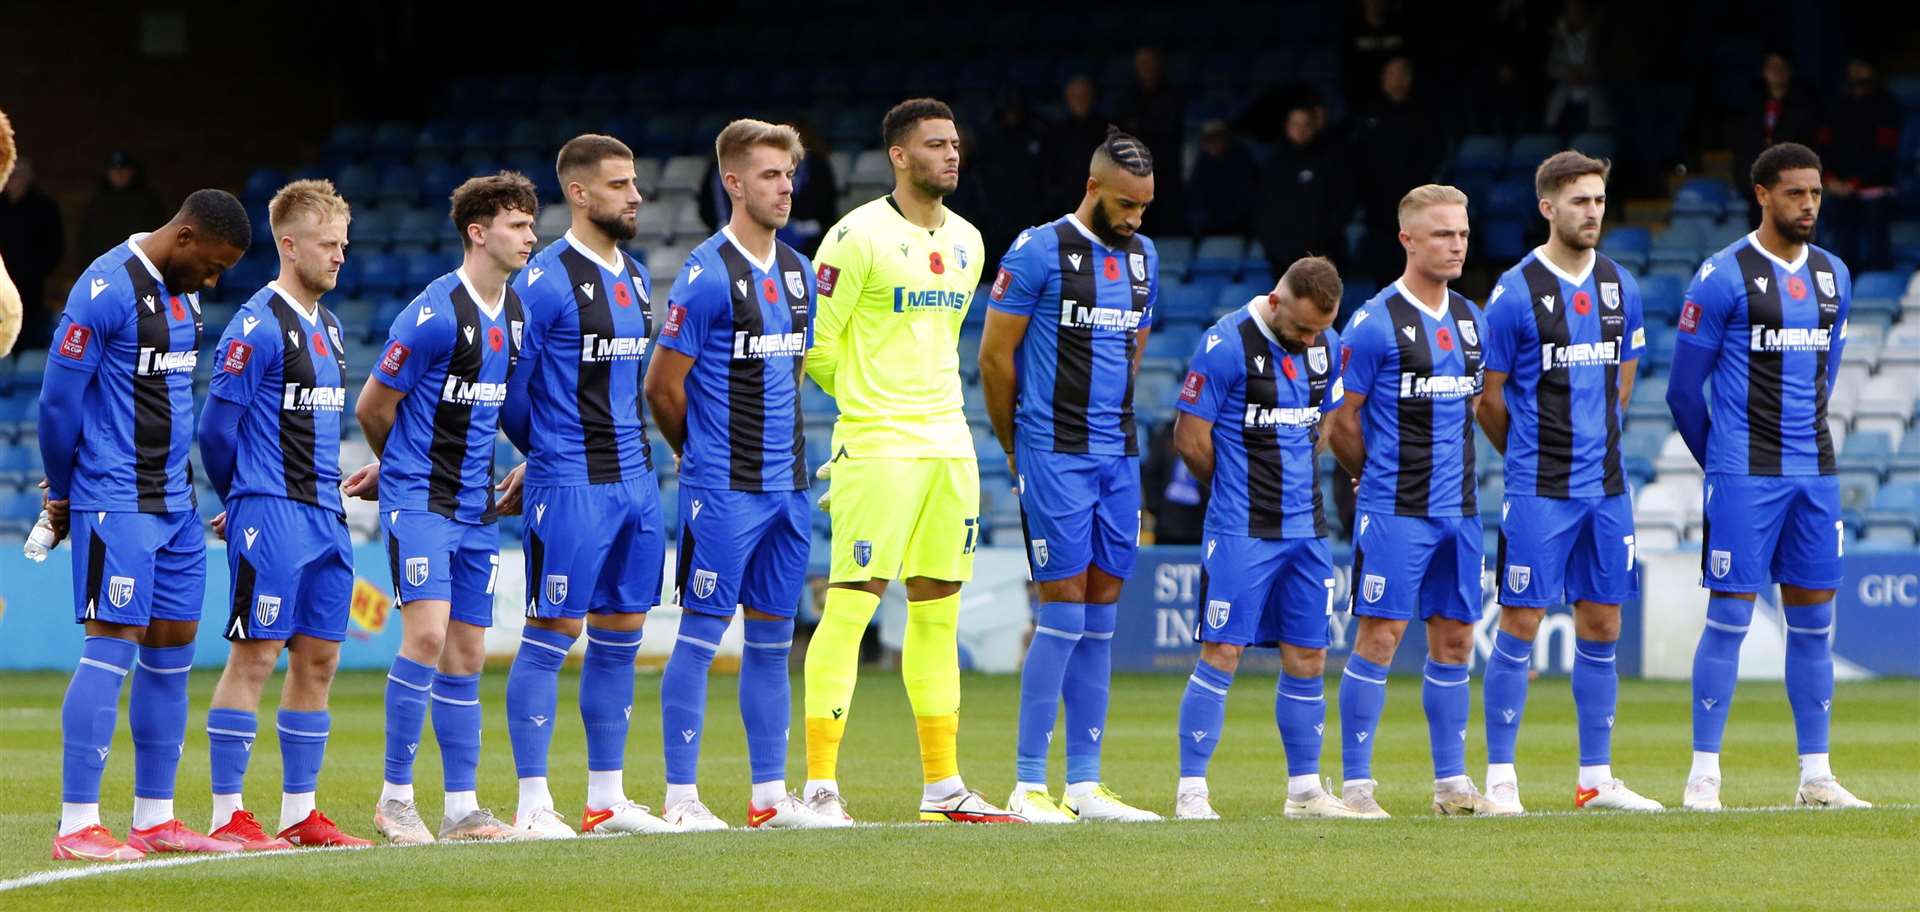 The players pay their respects to the fallen as Remembrance Day commemorations were held before kick-off. Picture: Andy Jones